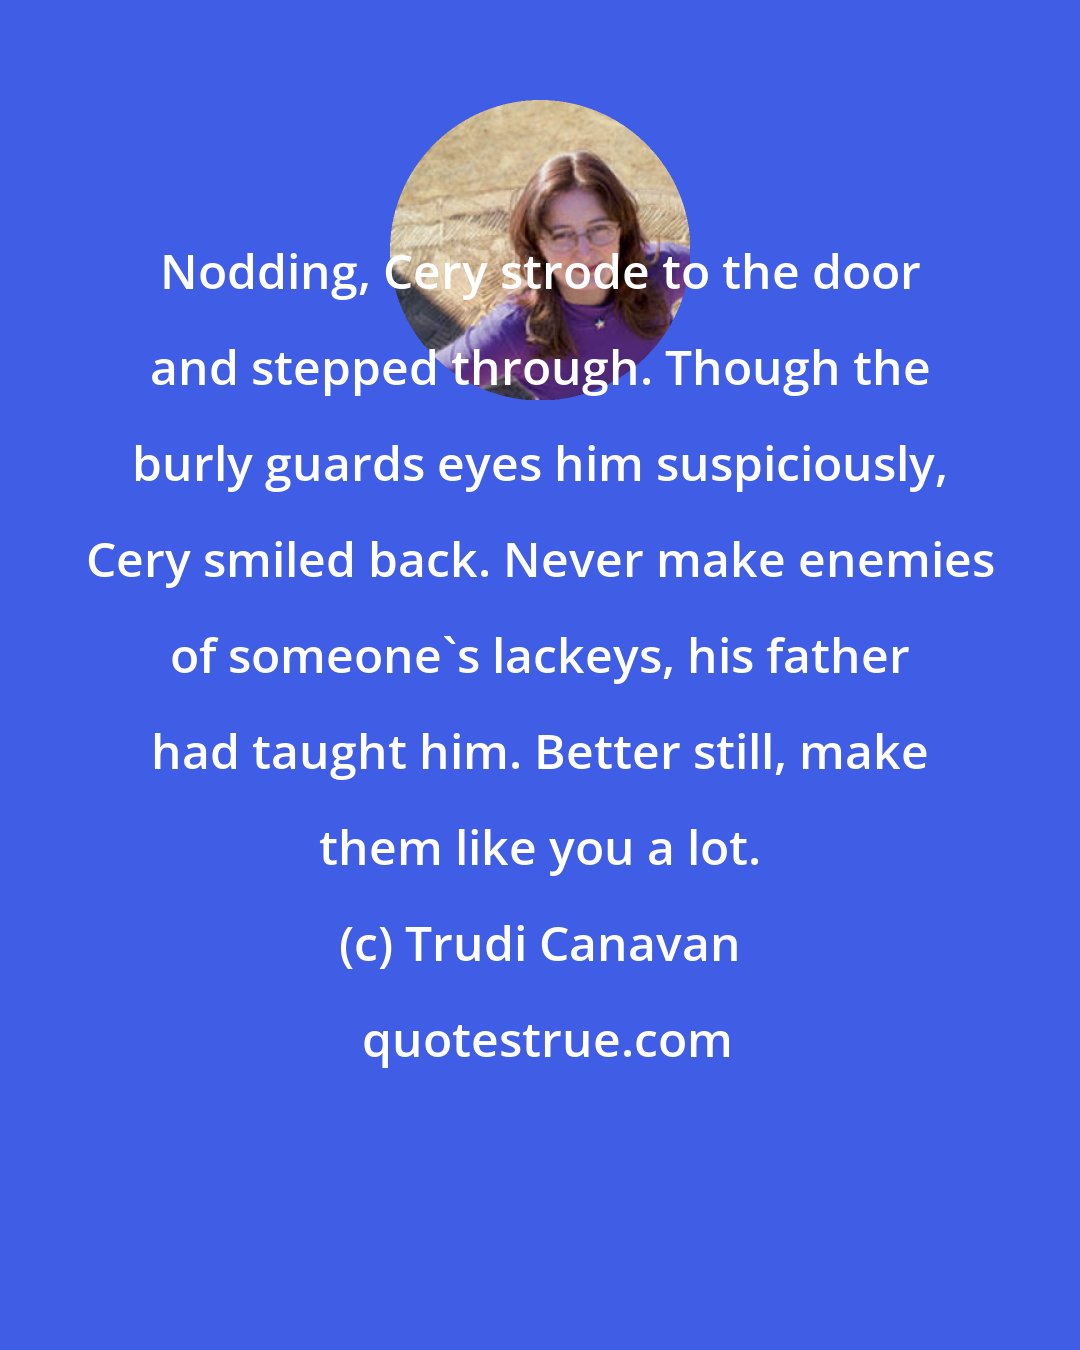 Trudi Canavan: Nodding, Cery strode to the door and stepped through. Though the burly guards eyes him suspiciously, Cery smiled back. Never make enemies of someone's lackeys, his father had taught him. Better still, make them like you a lot.